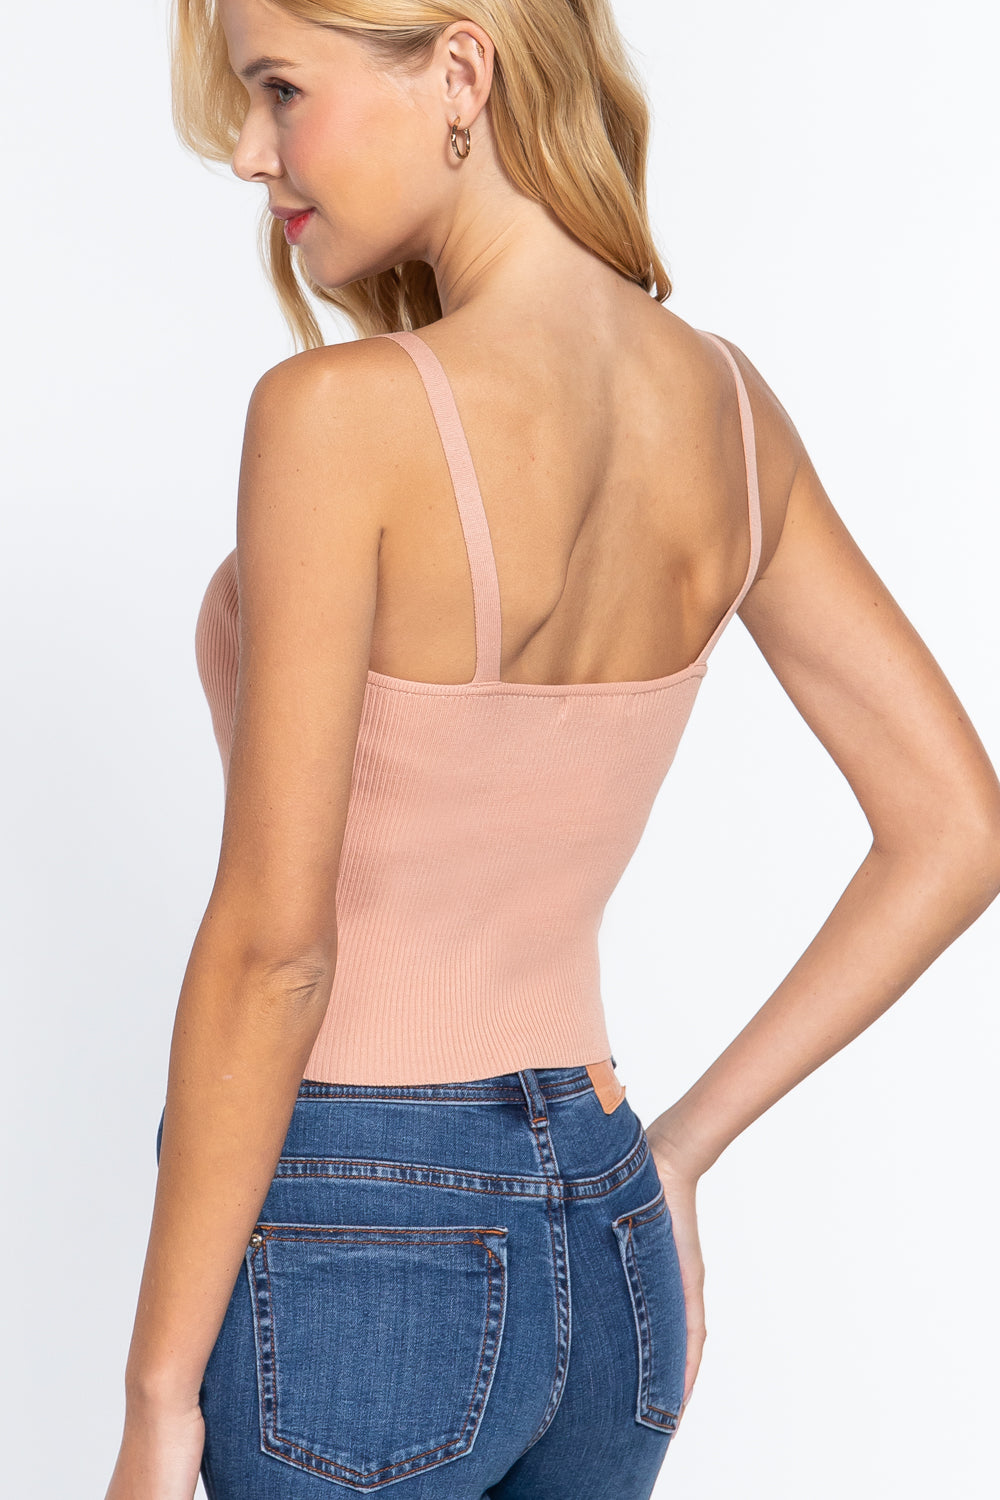 Front Closure With Hooks Sweater Cami Top Sunny EvE Fashion